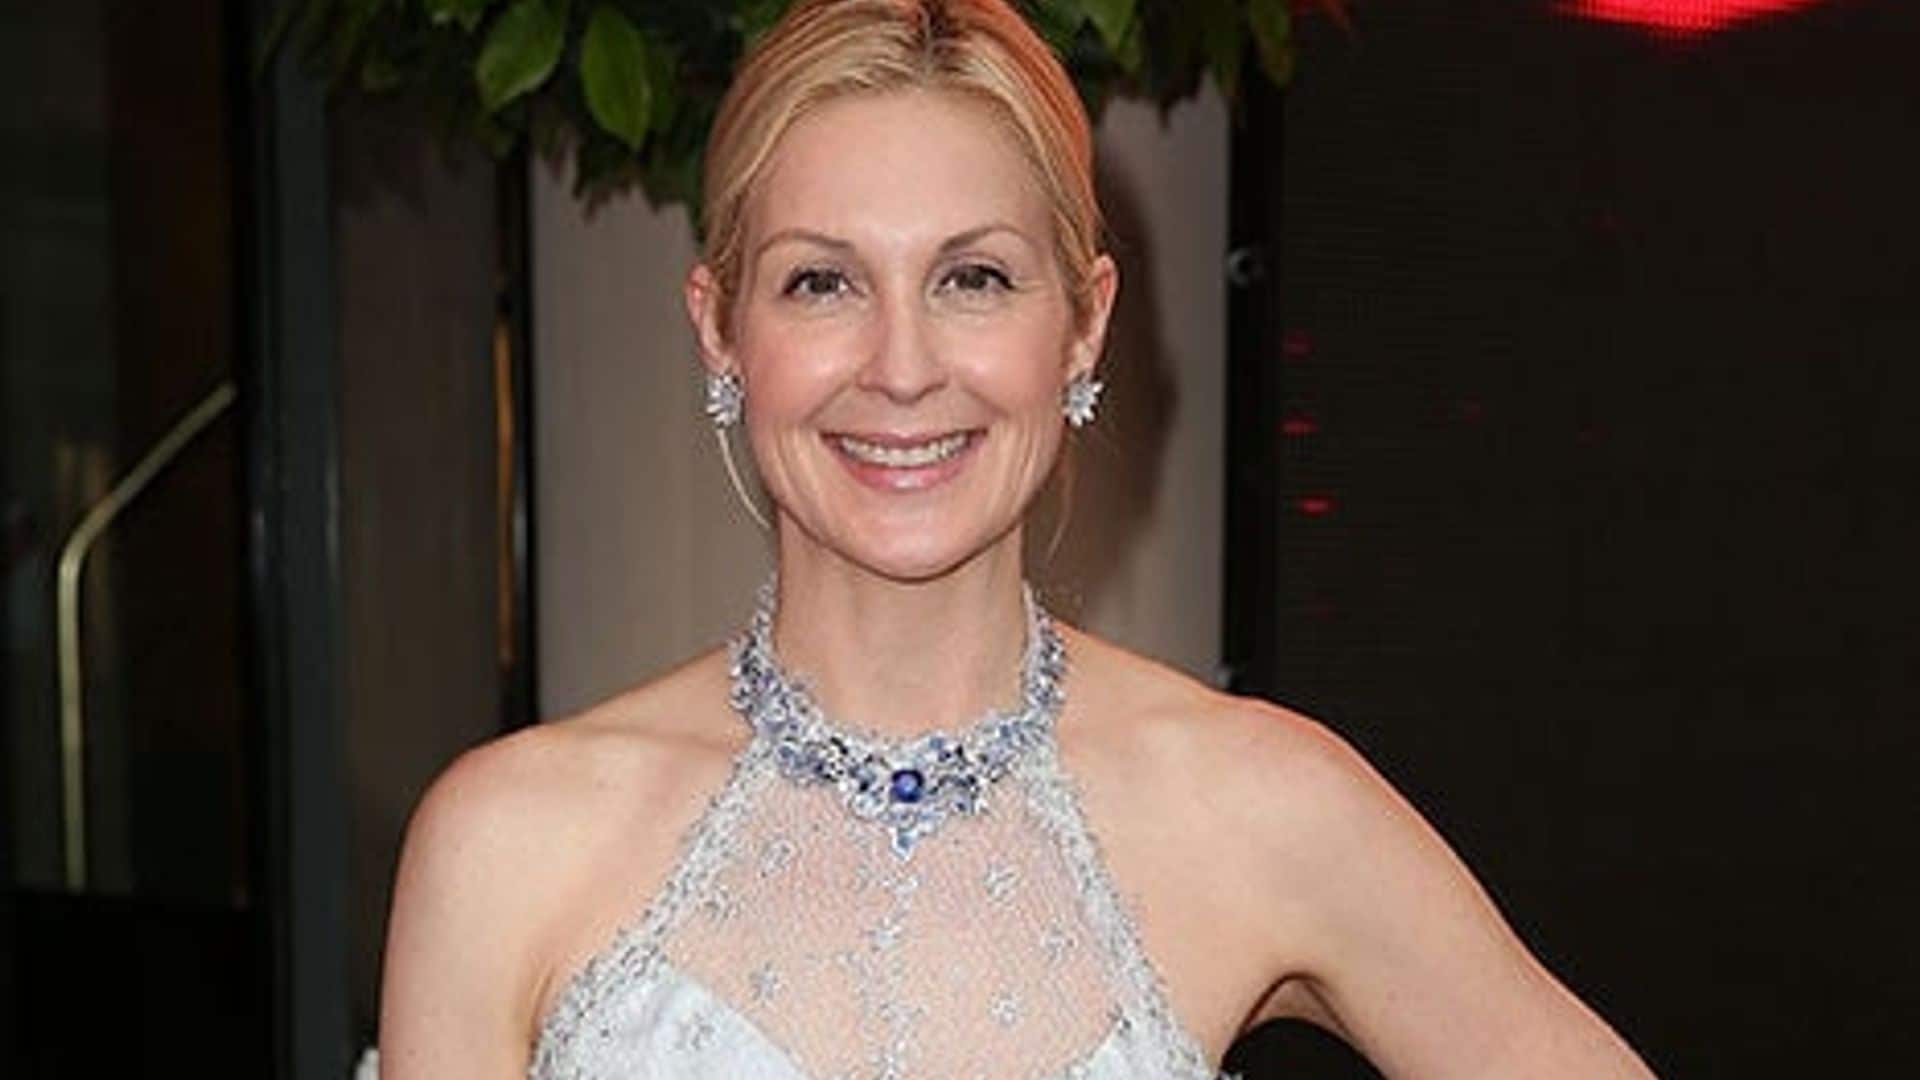 Kelly Rutherford awarded sole custody of her two children